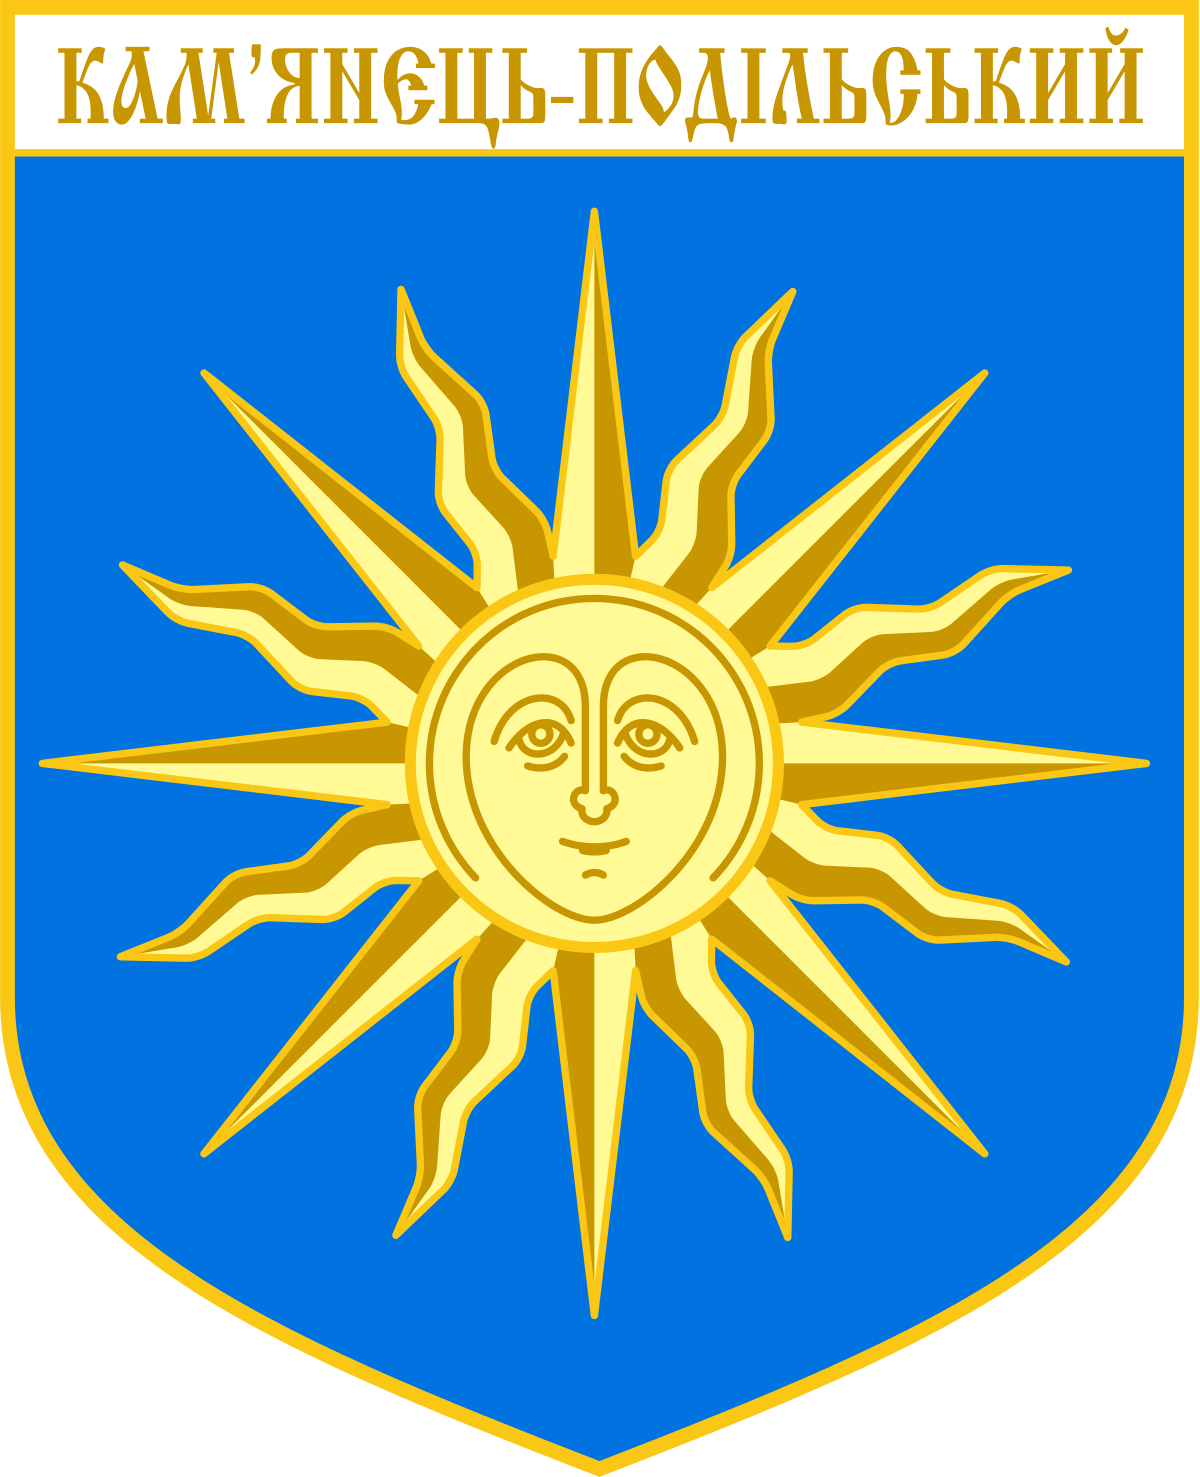 Kamianets-Podilskyi Coat Of Arms.